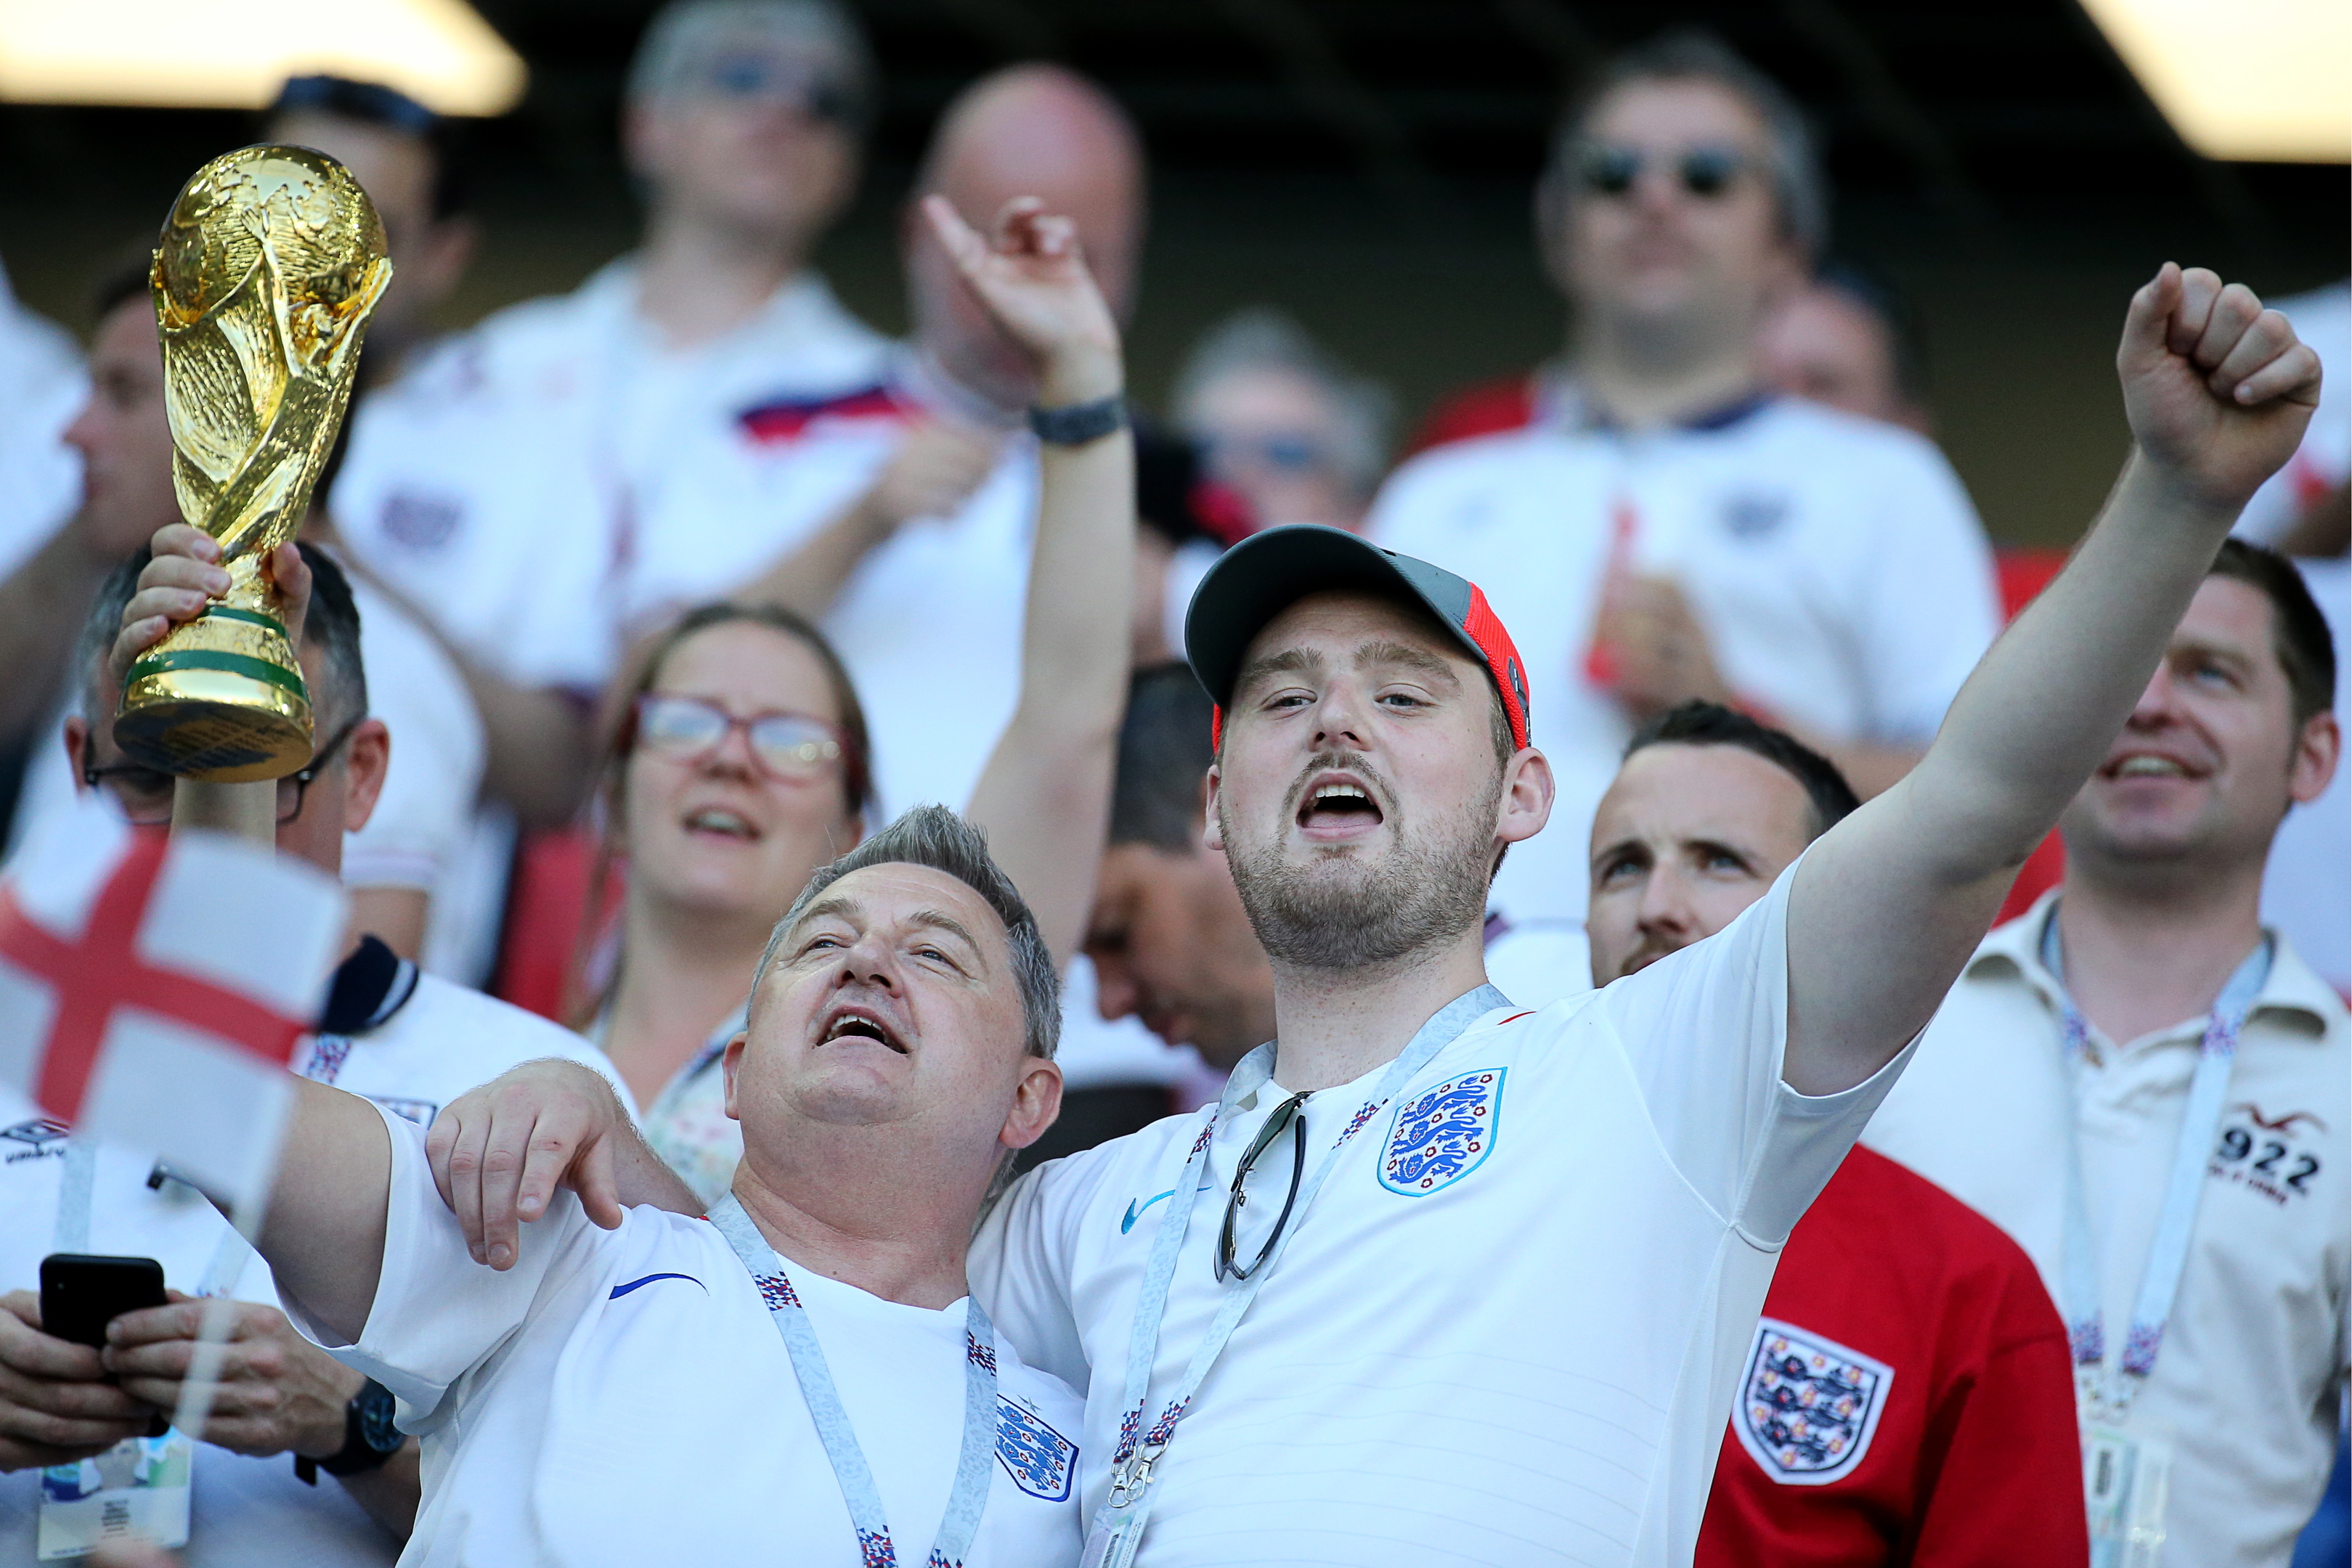 England supporters in Russia  (Peter KovalevTASS via Getty Images)